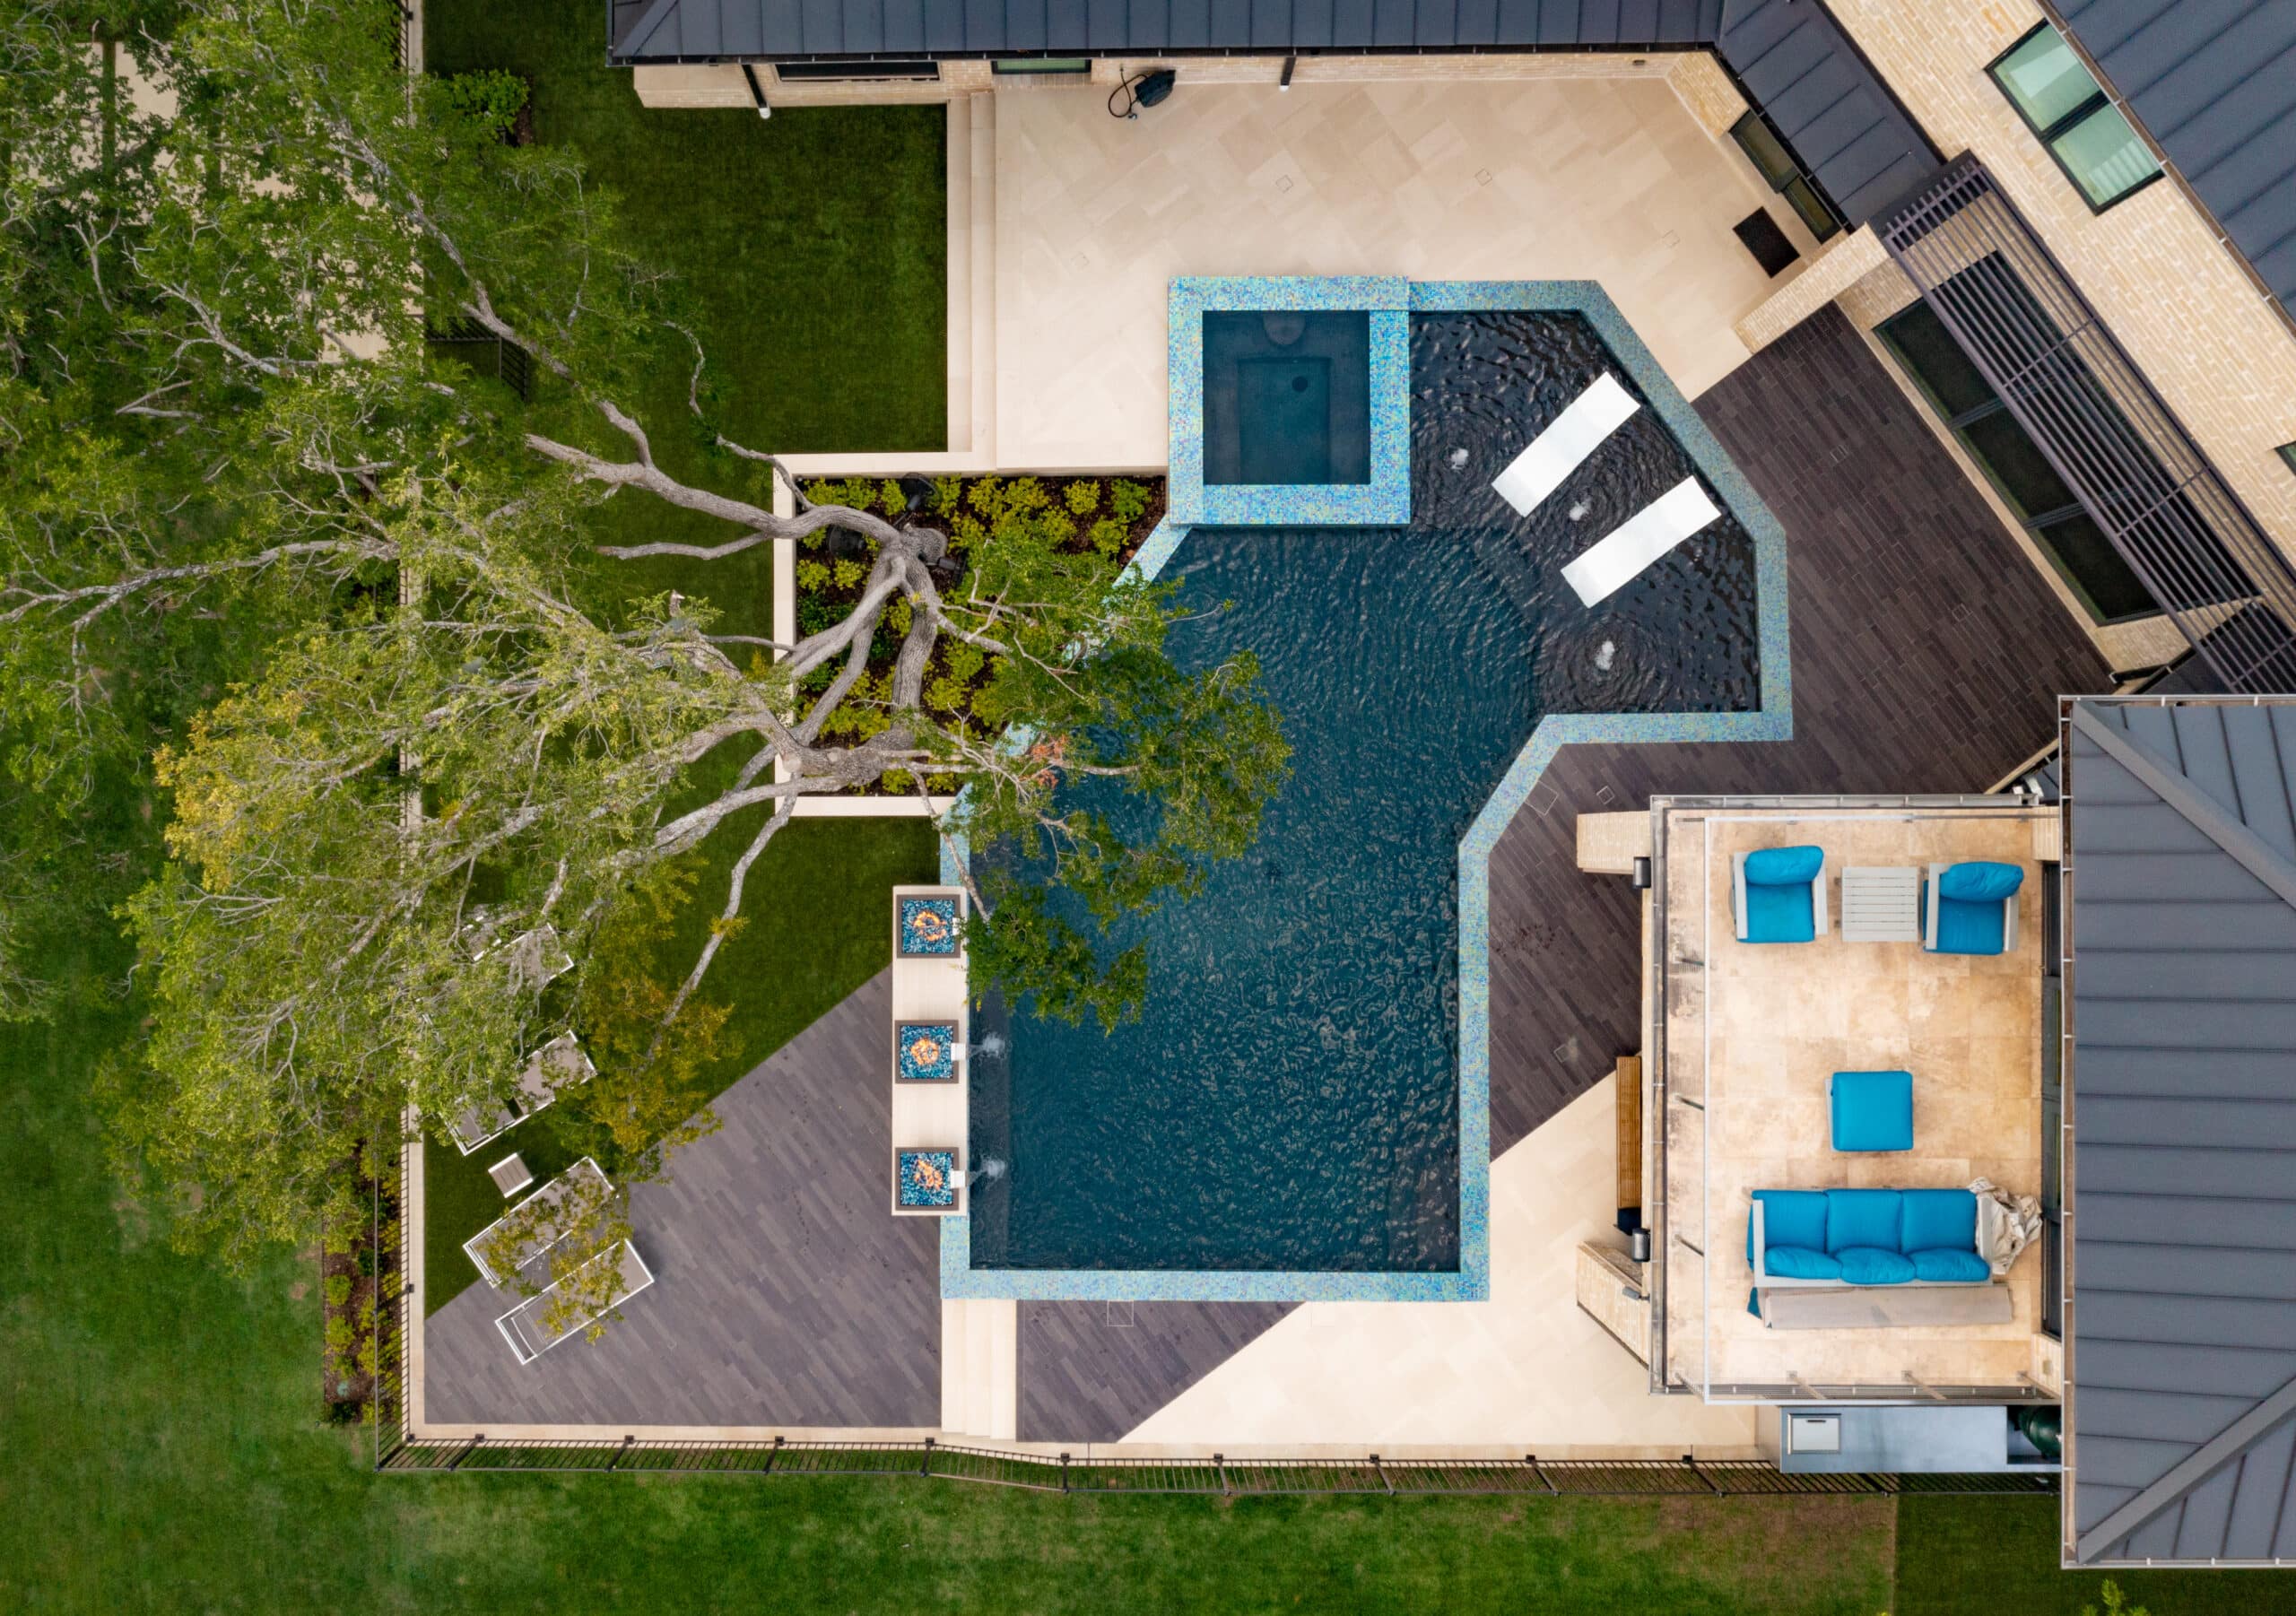 Clear Lake Circle Pool Design - Harold Leidner Landscape Architects